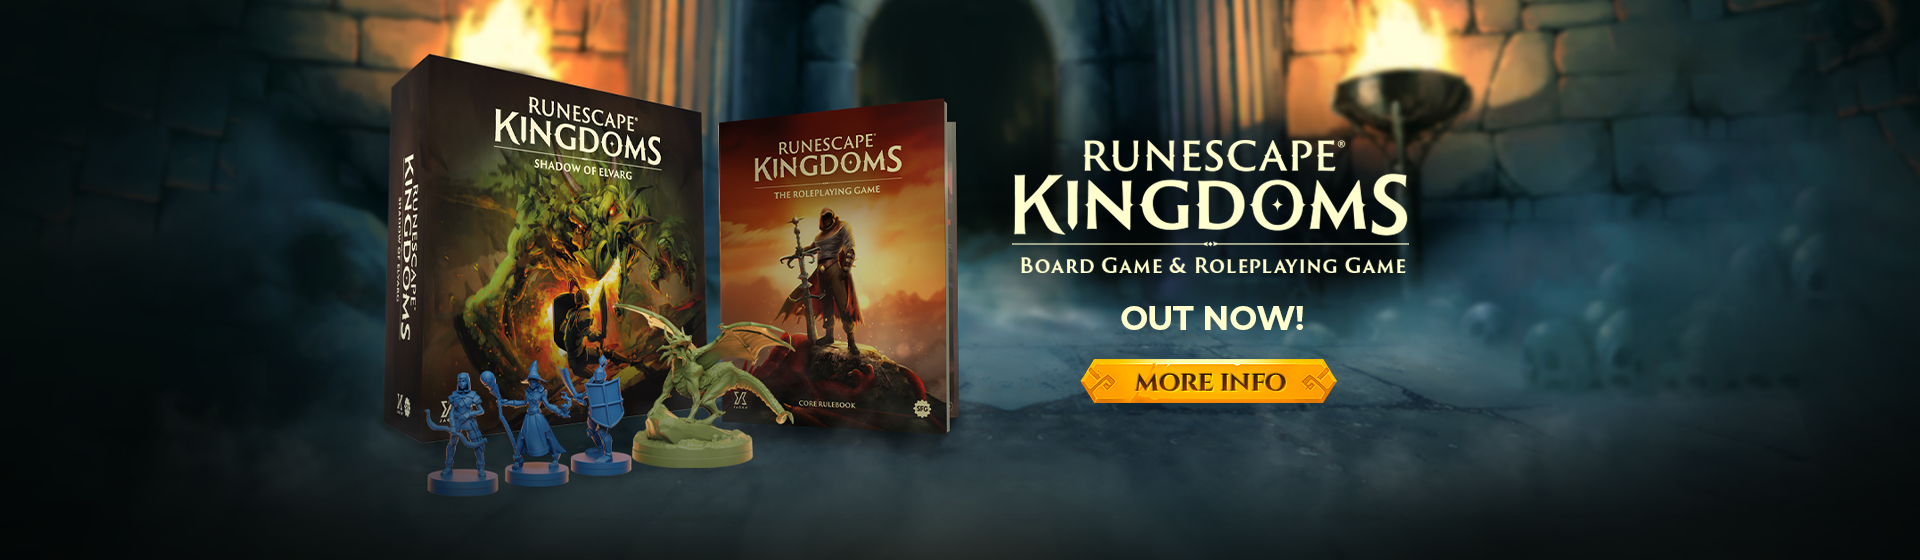 RuneScape Kingdoms Board Game & Roleplaying Game - Out Now!